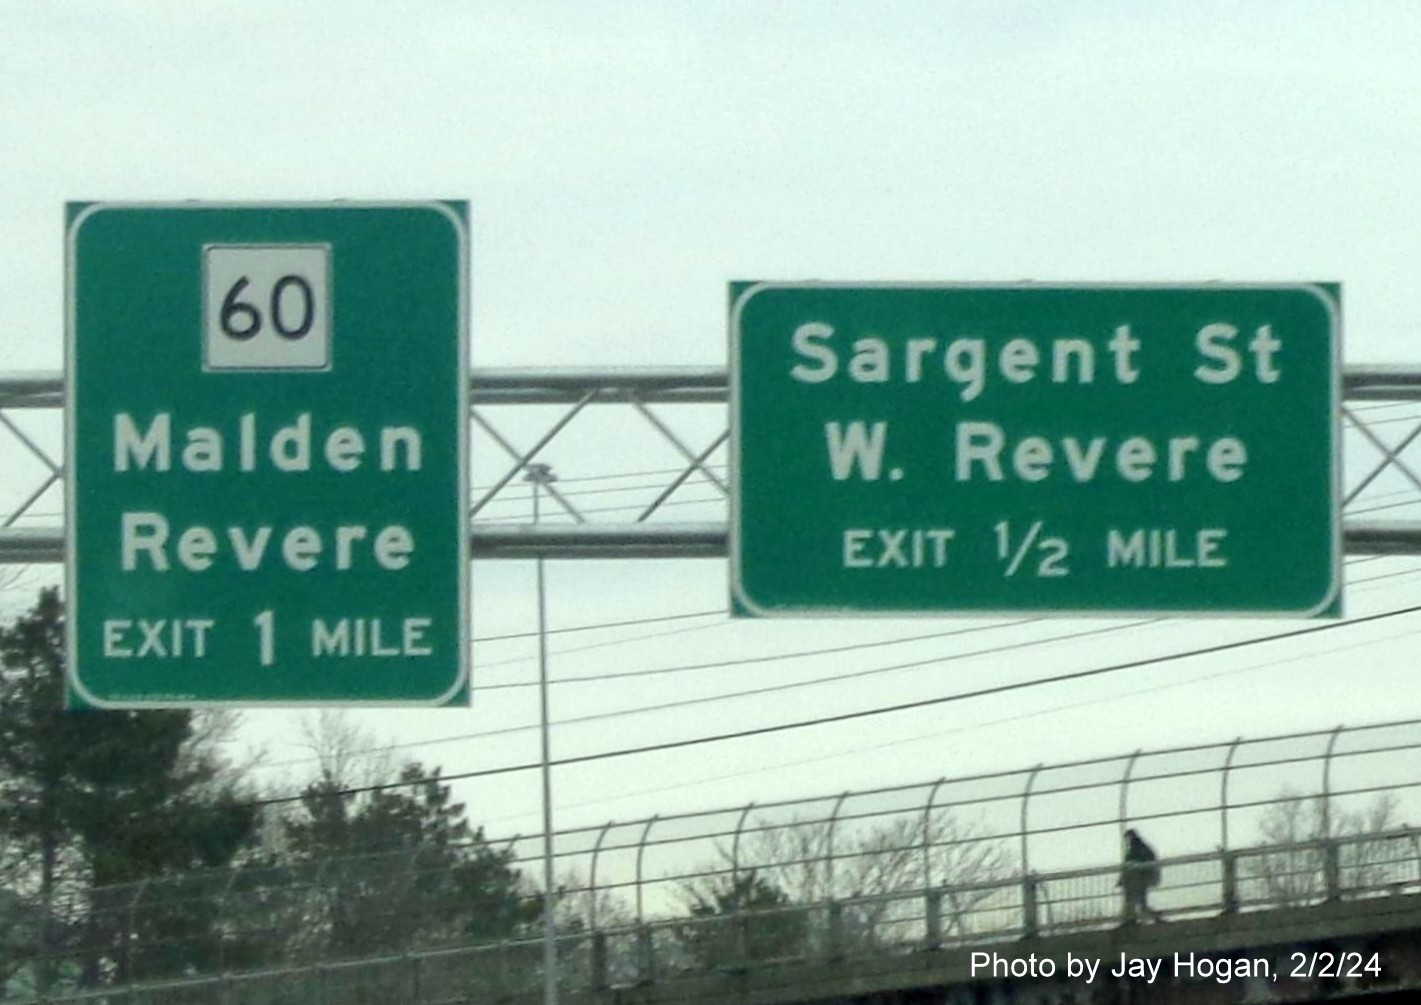 Image of recently placed overhead advance signs for MA 60 and Sargent Street exits on US 1 North in Revere, by Kevin Manfra, February 2024